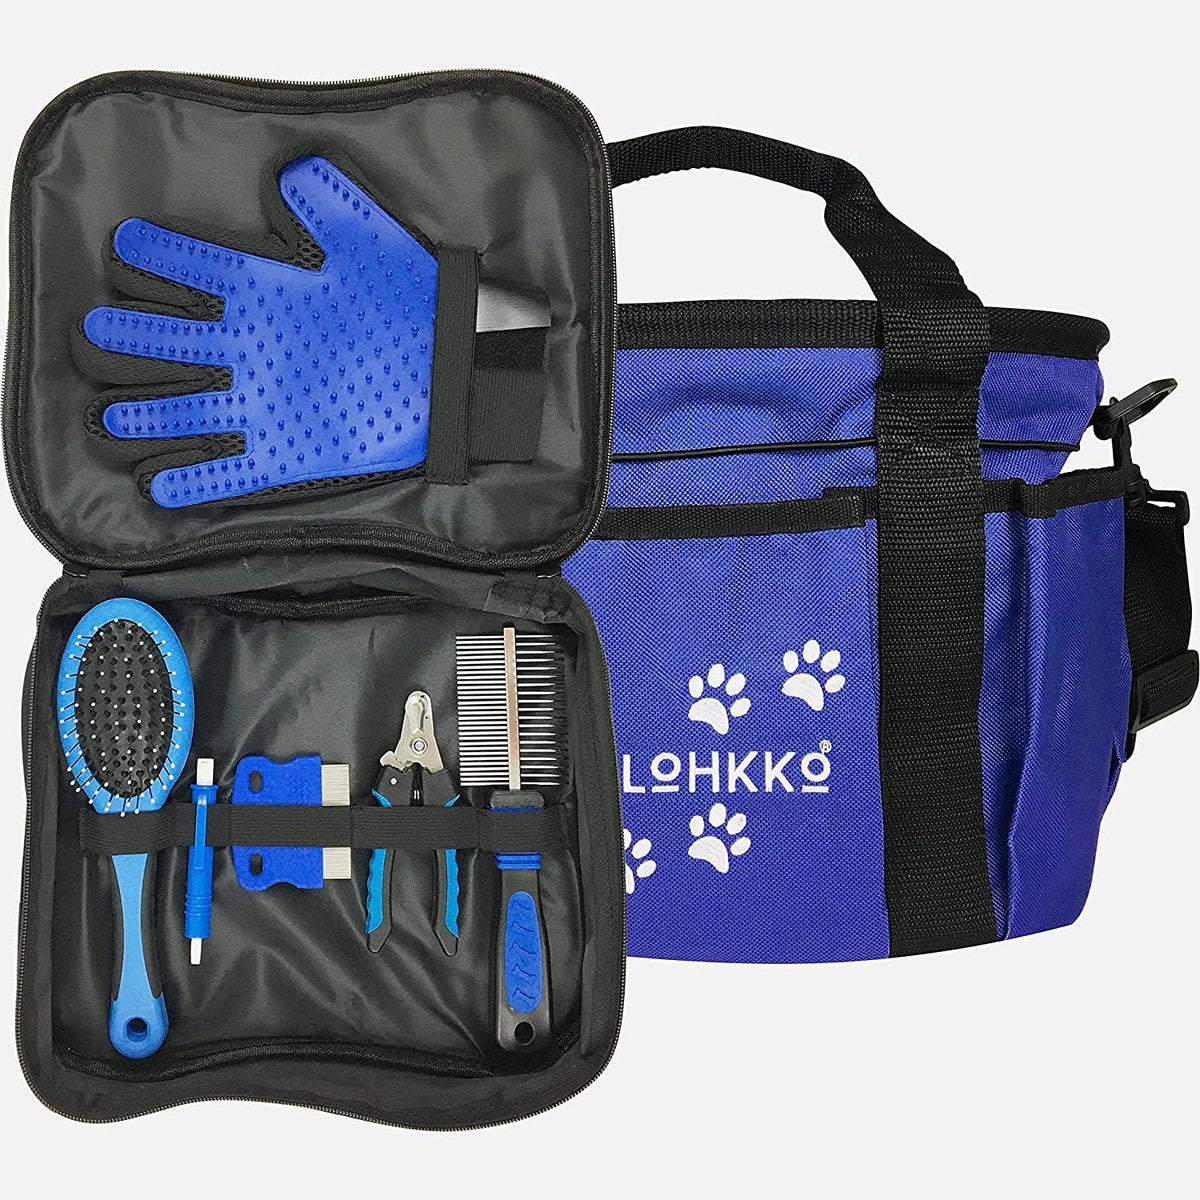 8pc Dog Cat Pet Grooming Kit With Organizer & Travel Tote